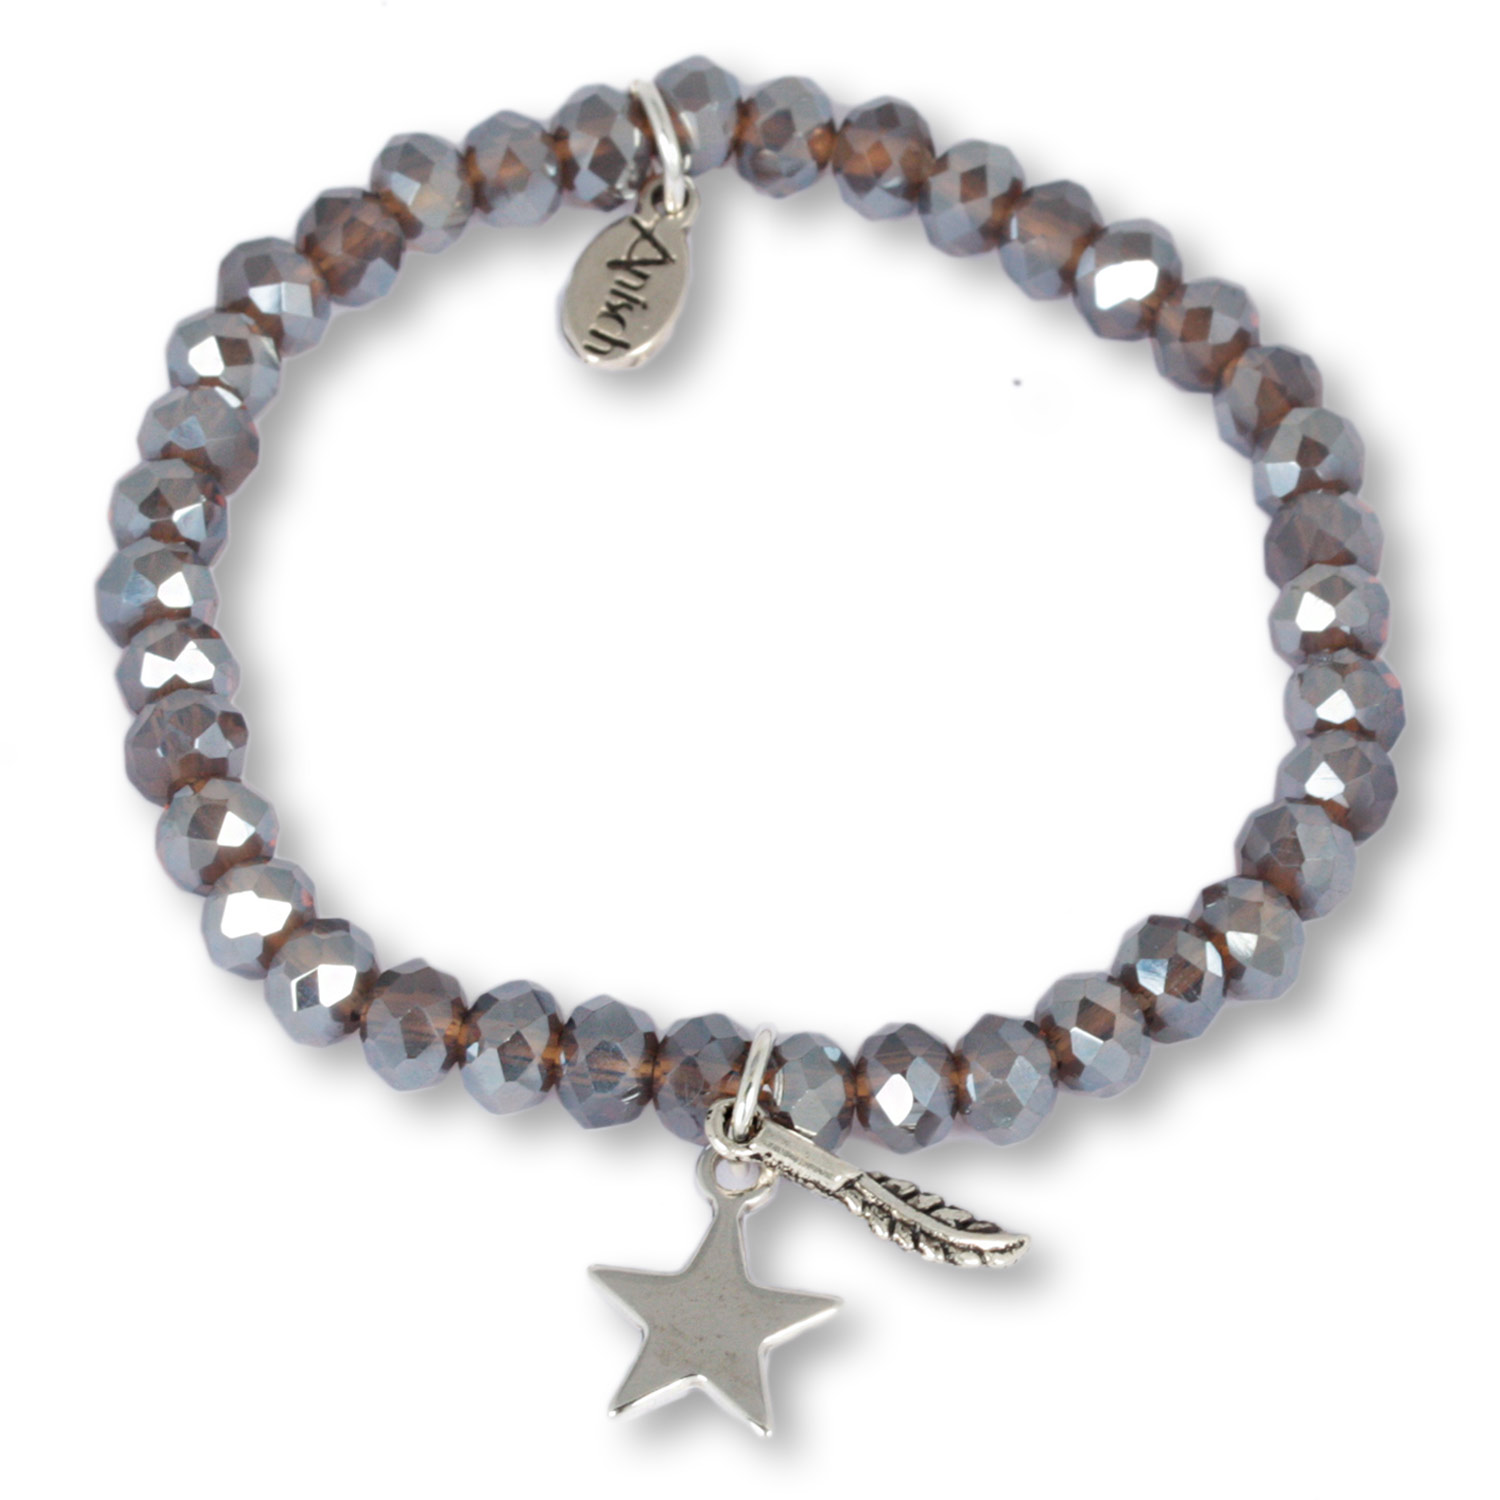 Caribic Blue Dusty Glow- Crystal bracelet with feather and star